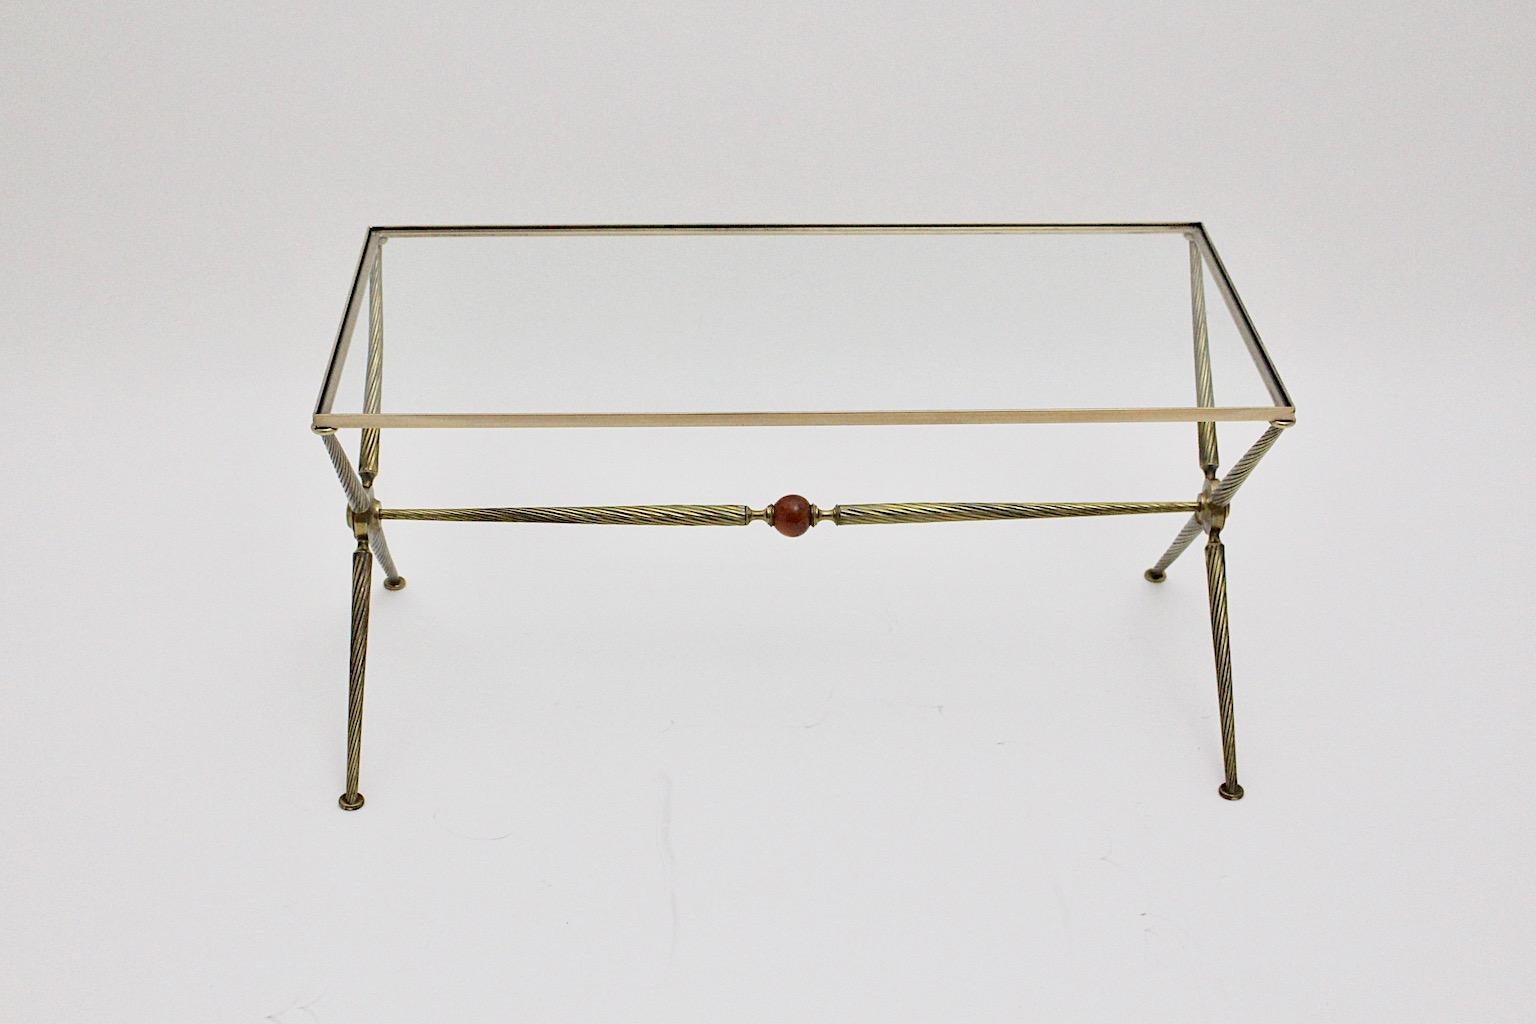 Mid Century Modern vintage sofa table or coffee table attributed to Maison Bagues, 1950s France.
An elegant and sophisticated coffee table or sofa table attributed to Maison Bagues consists of a X-base and solid turned brass conical table legs.
The